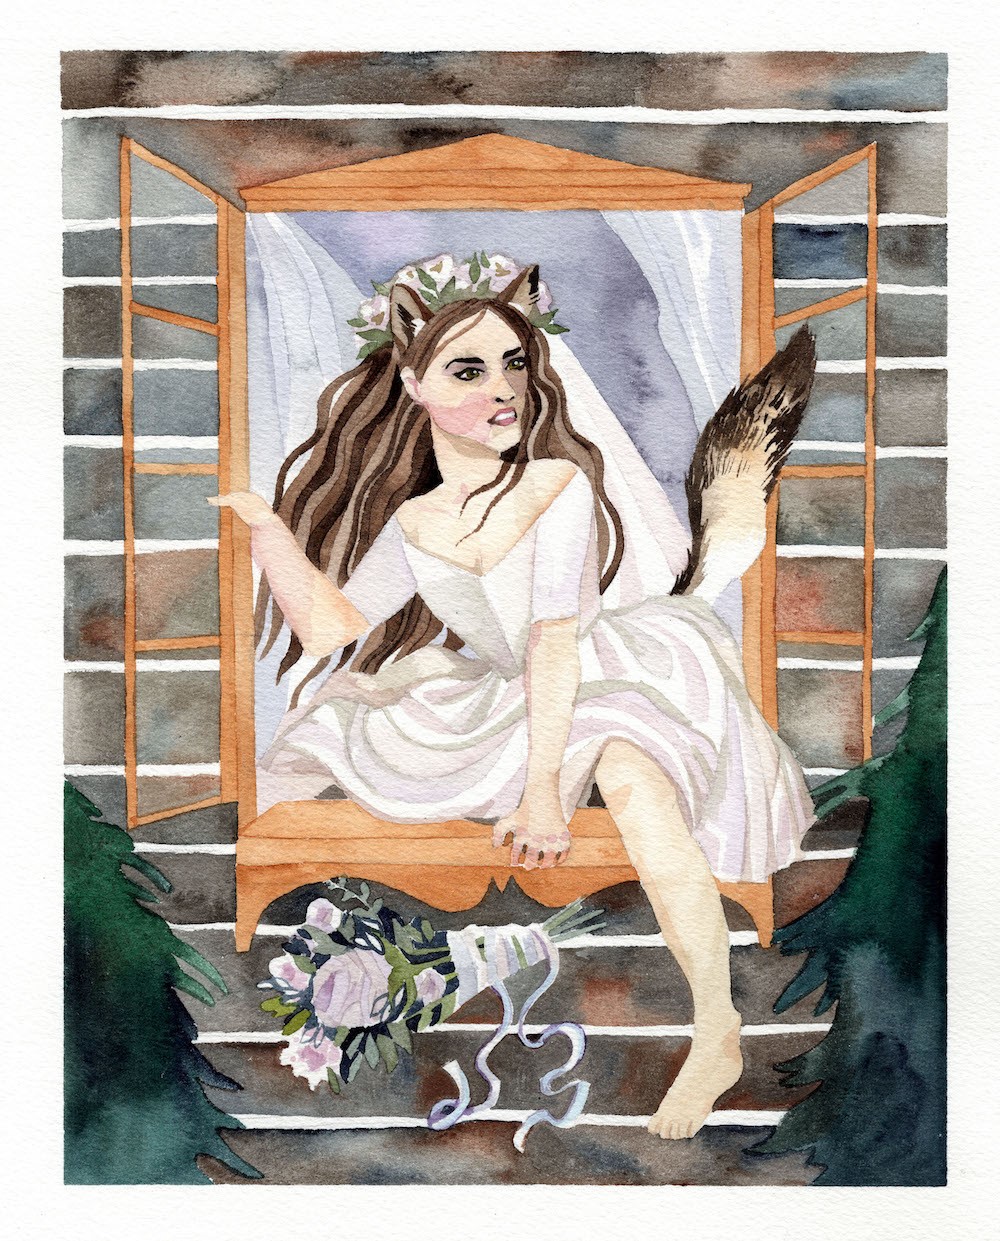 "Wolf Bride" by Marni Manning